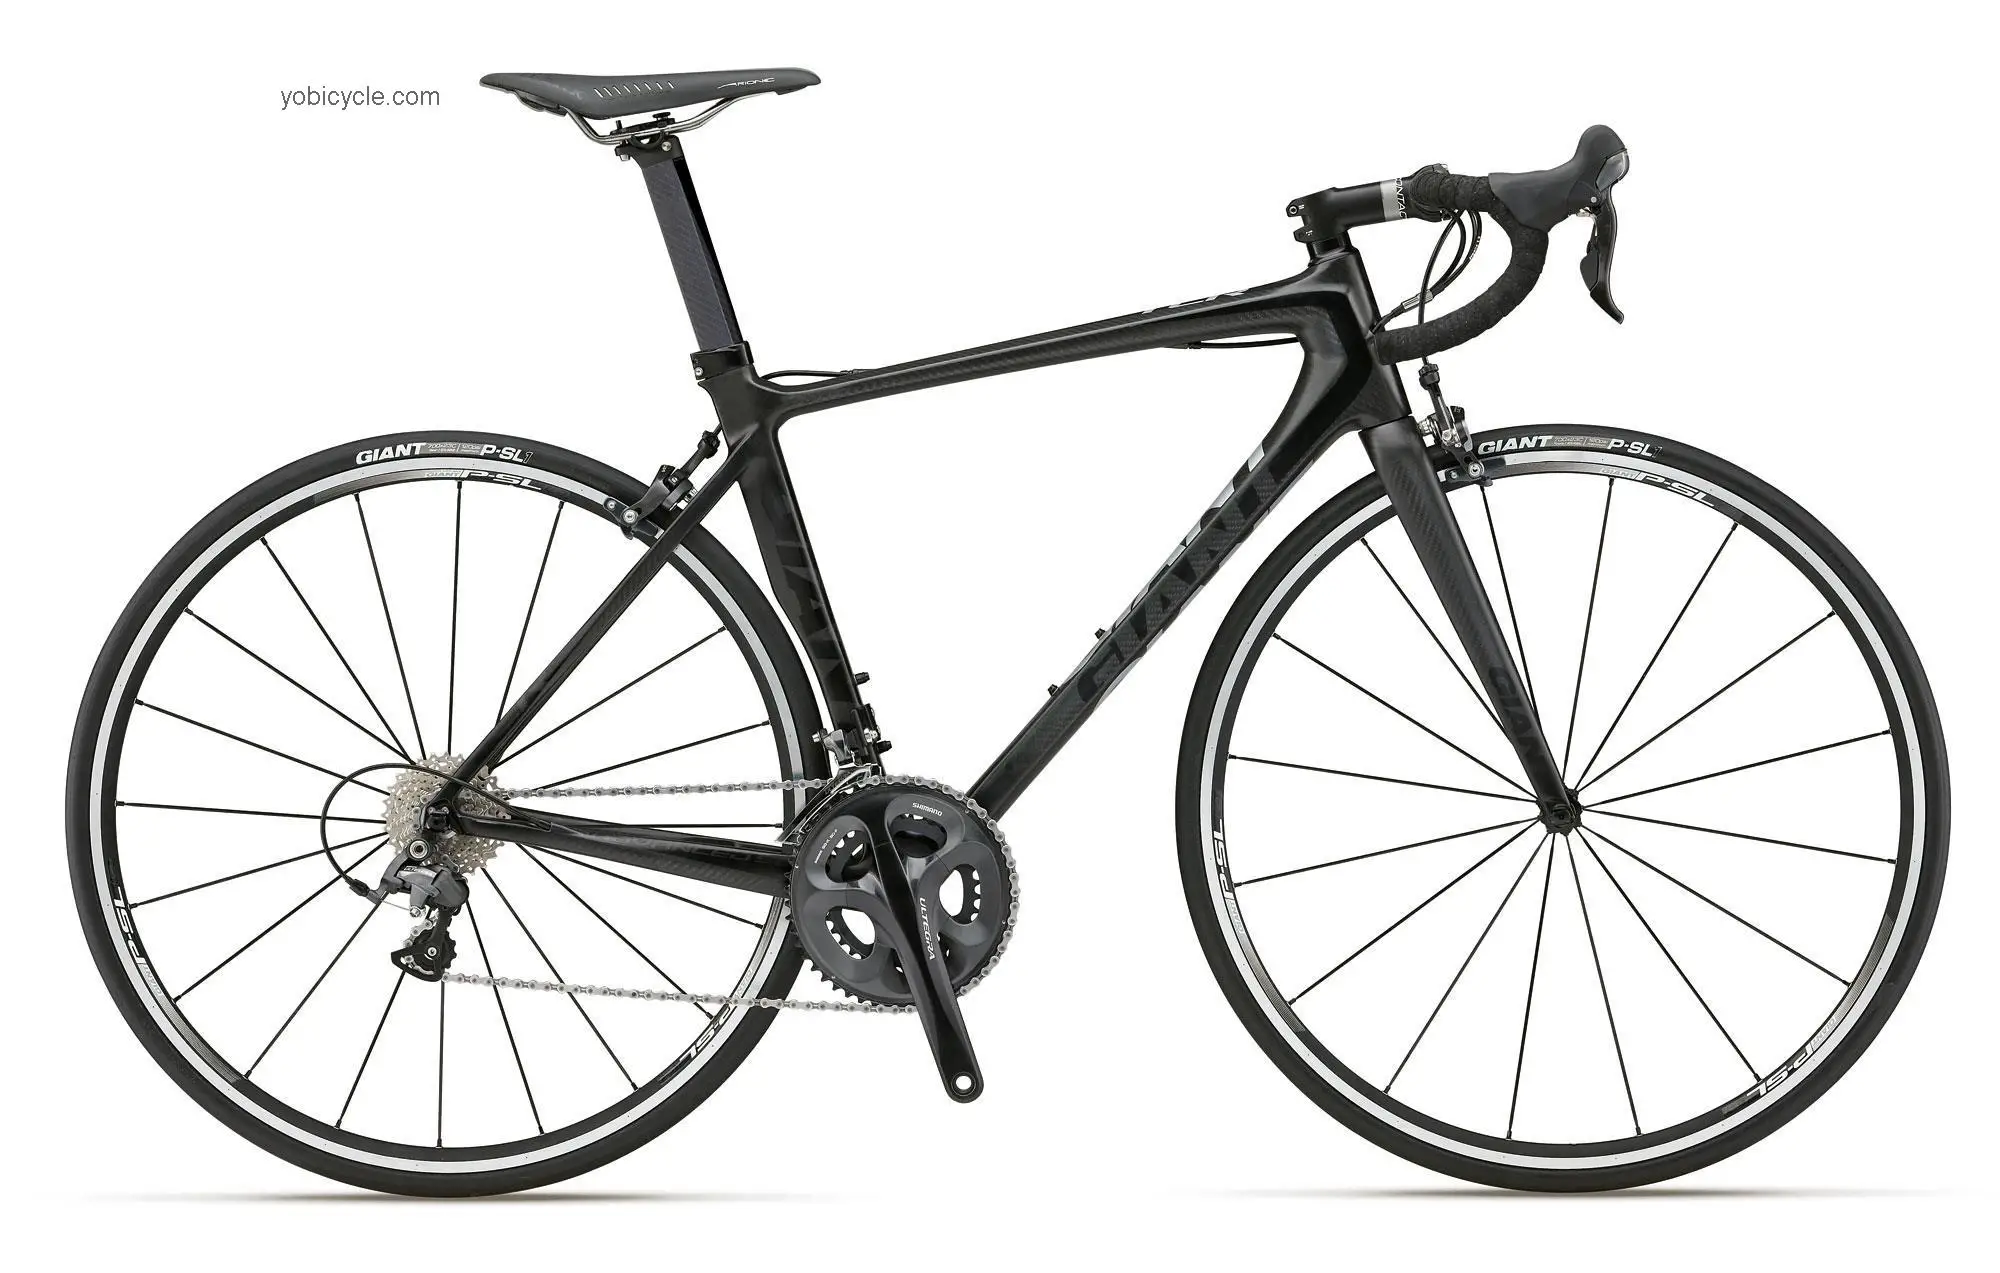 Giant TCR Advanced SL 3 Compact 2012 comparison online with competitors